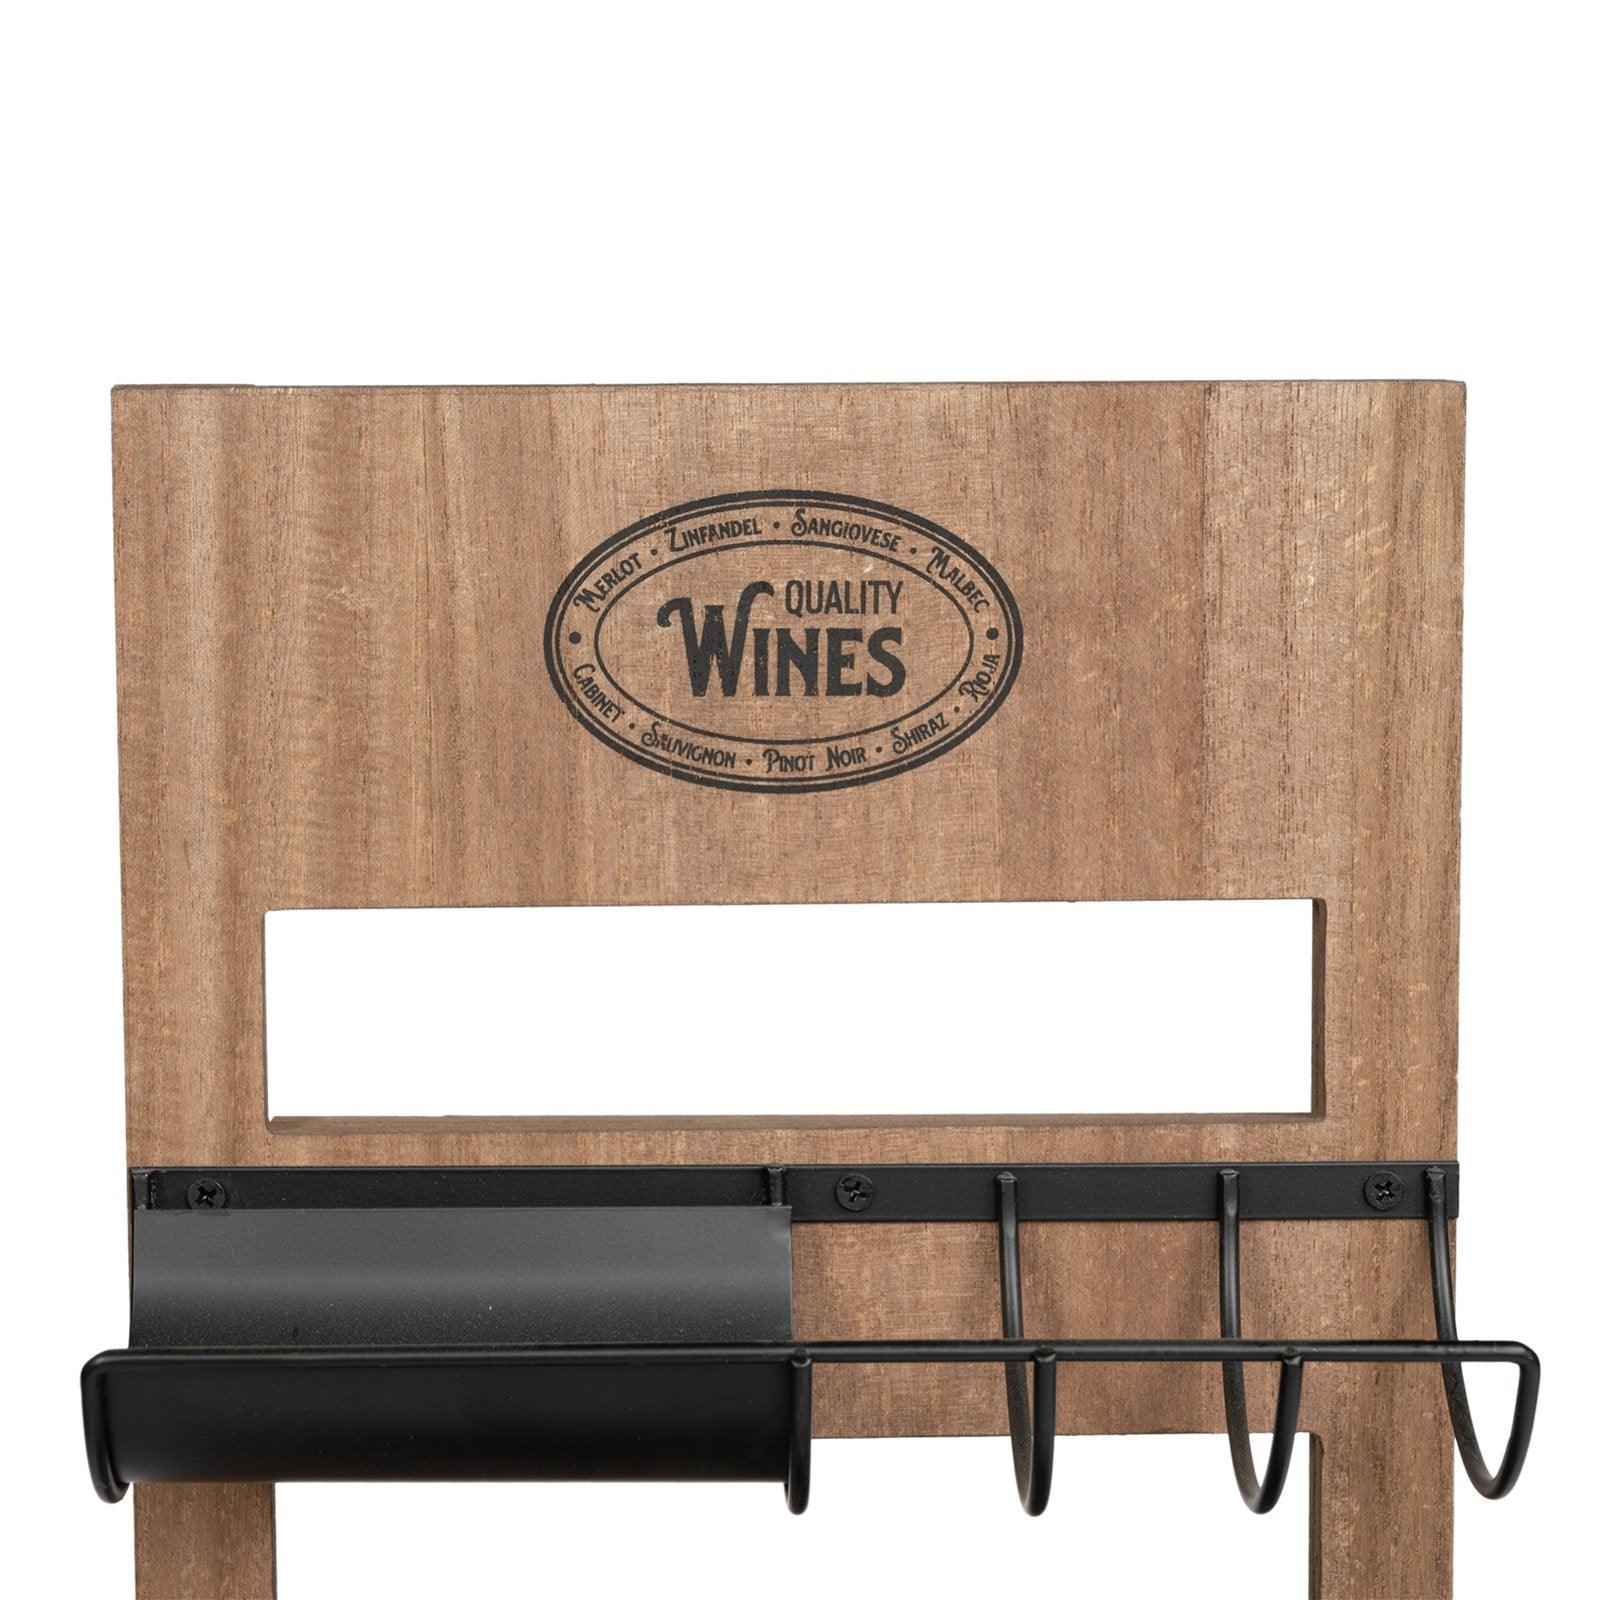 View Wall Hanging 6 Wine Bottle Holder information